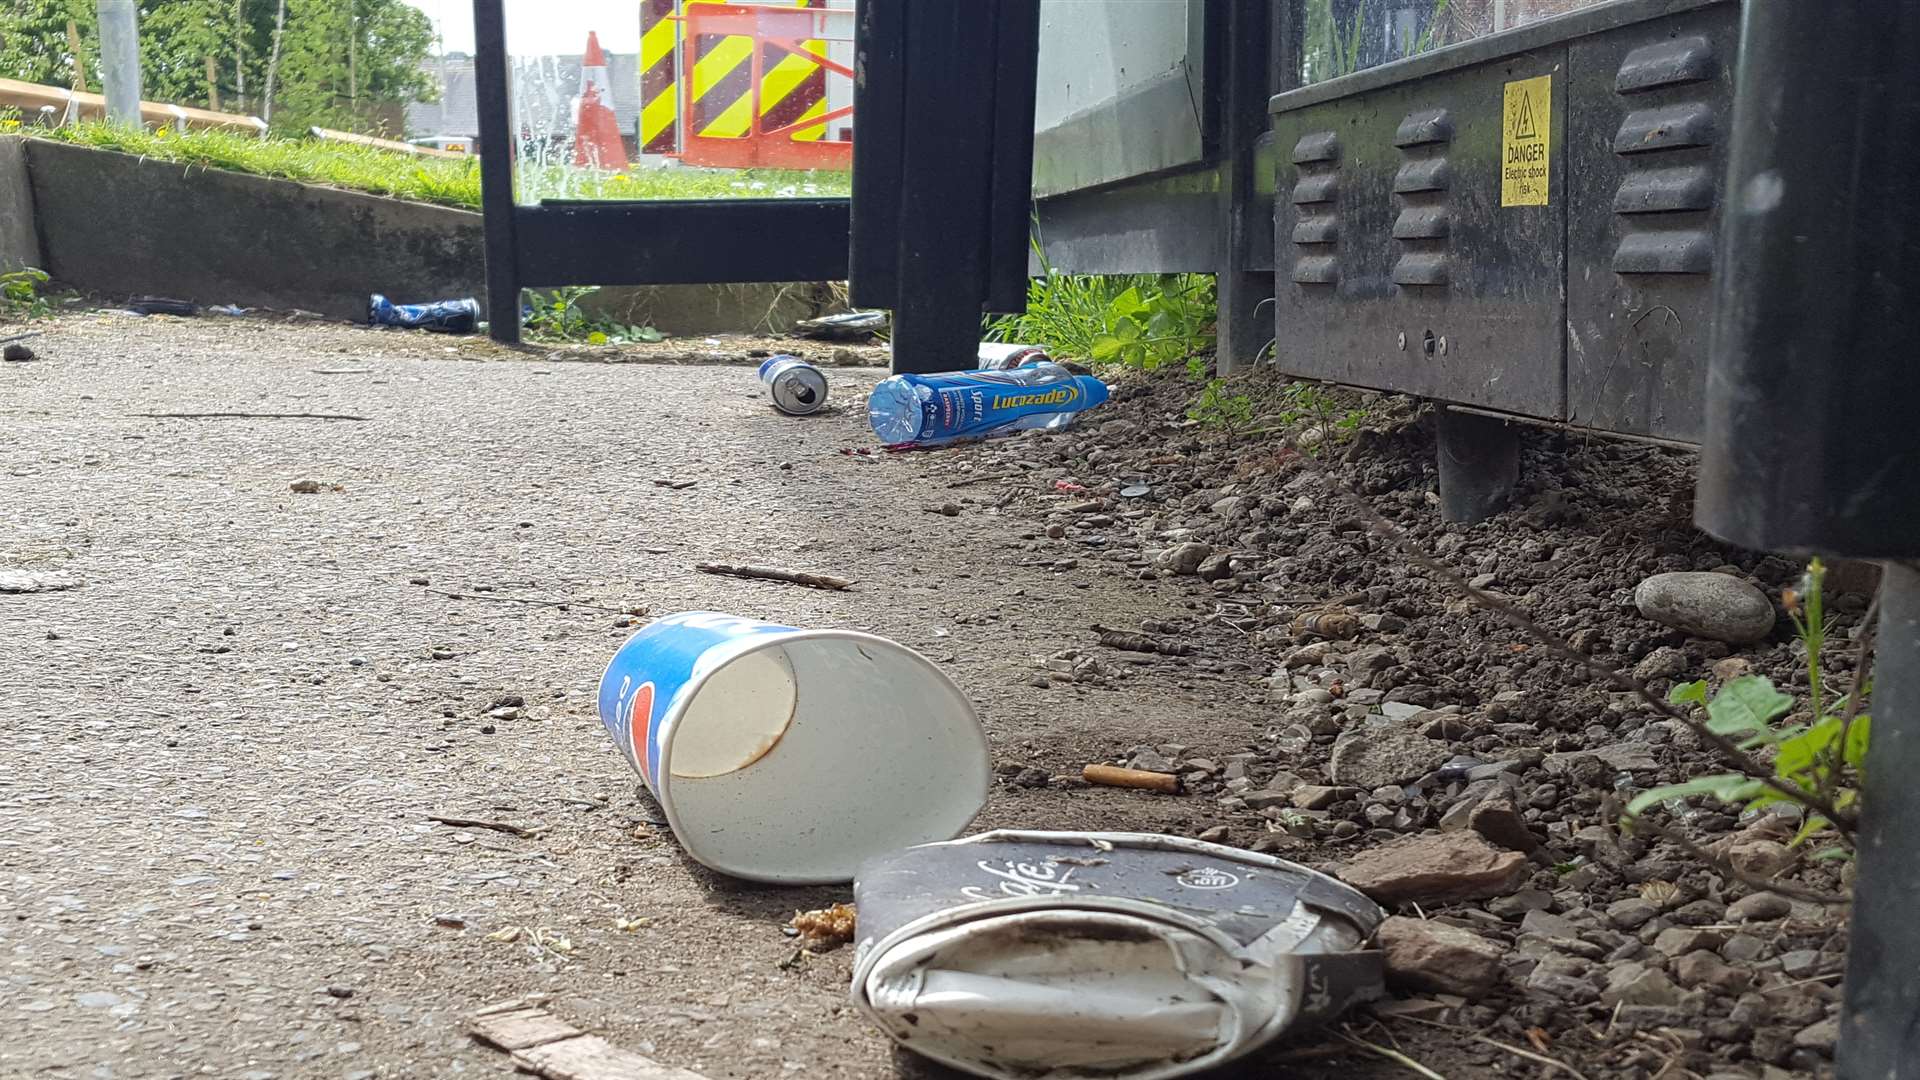 Litter at a bus stop in Ashford before the fines were brought in